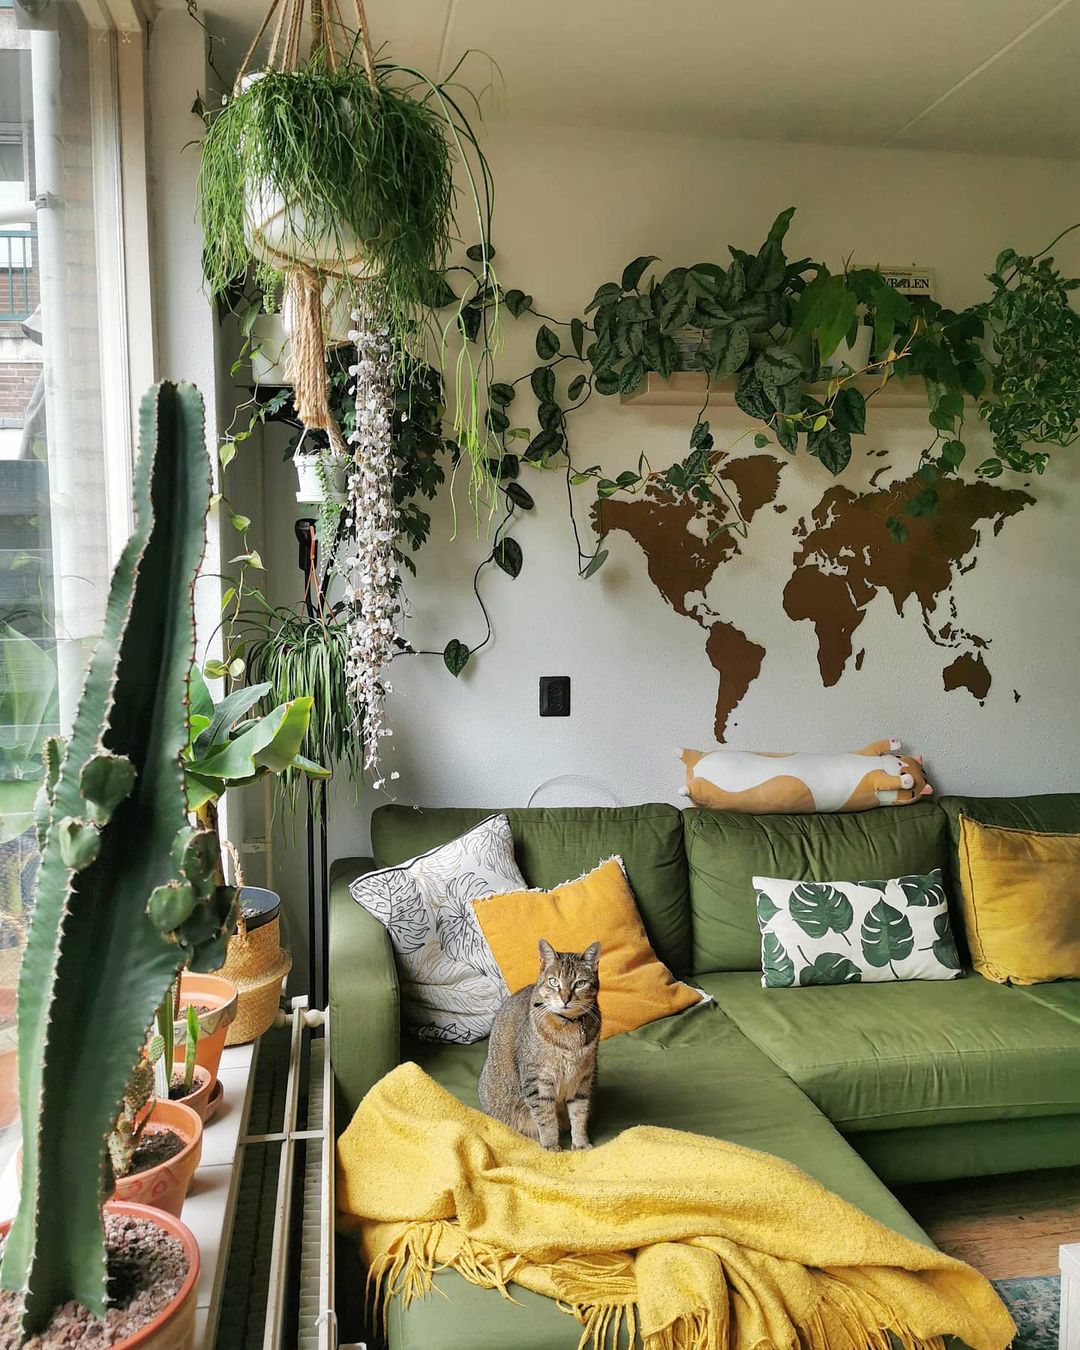 Living room featuring several trailing plants, succulants, and more, along with a cat. Photo by Instagram user @marty_thejunglelady.